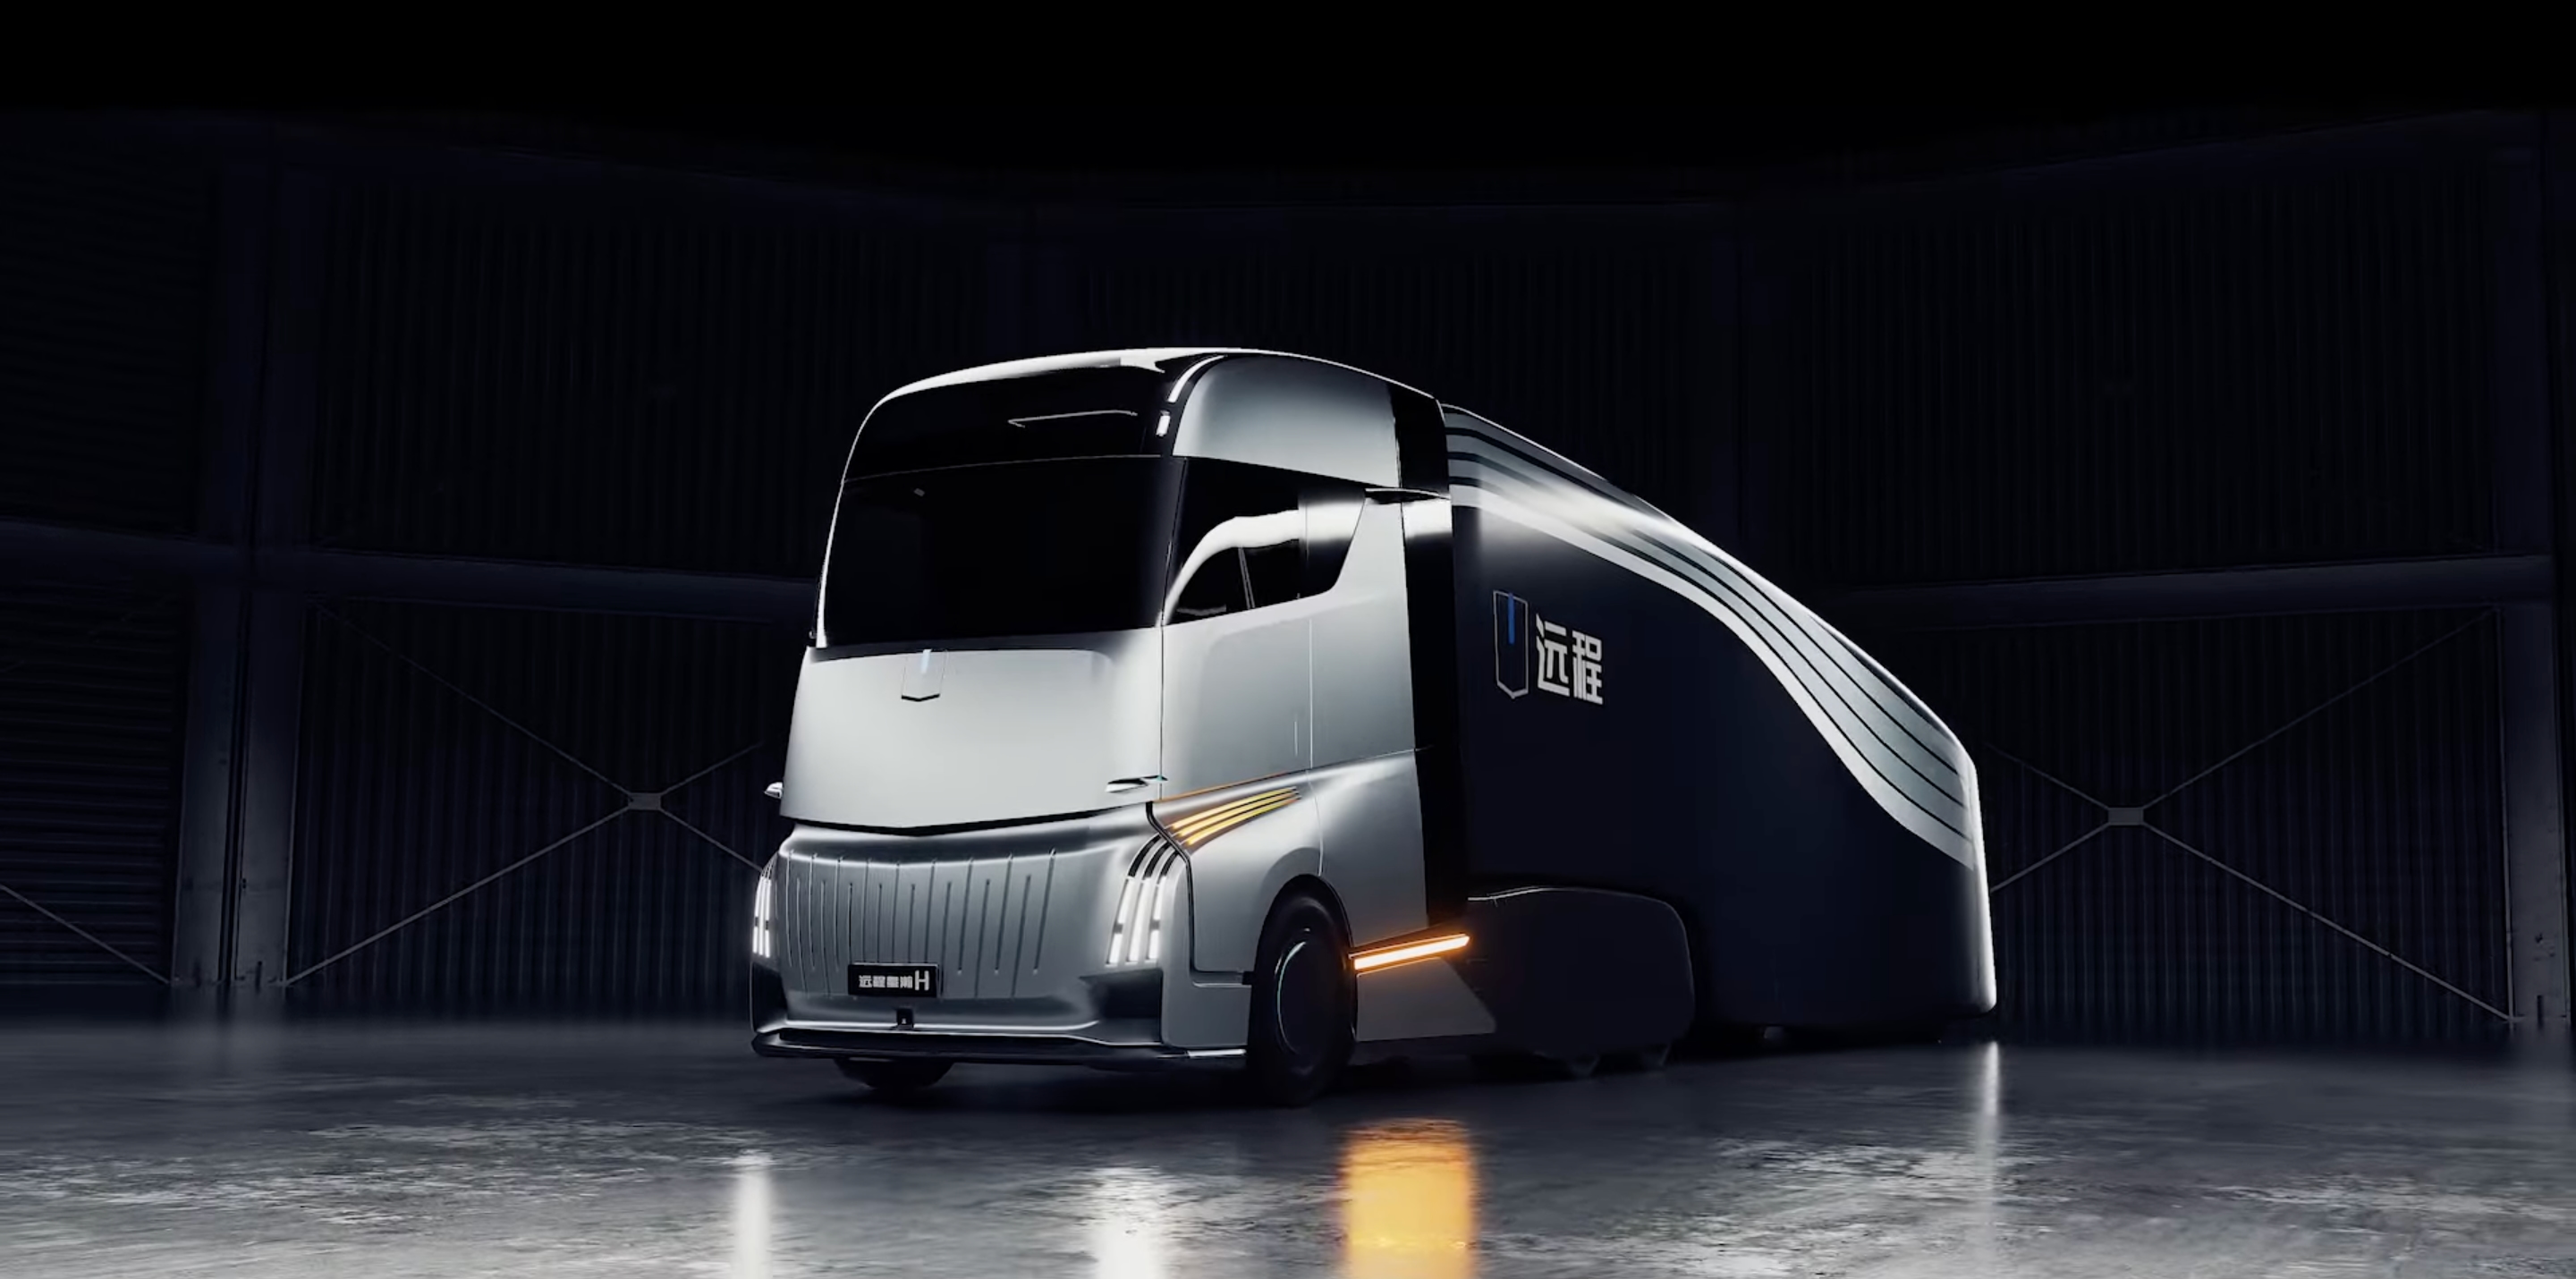 Washing machine, electric stove, shower and kitchen: a video showing the features of a Tesla Semi competitor appeared on the network